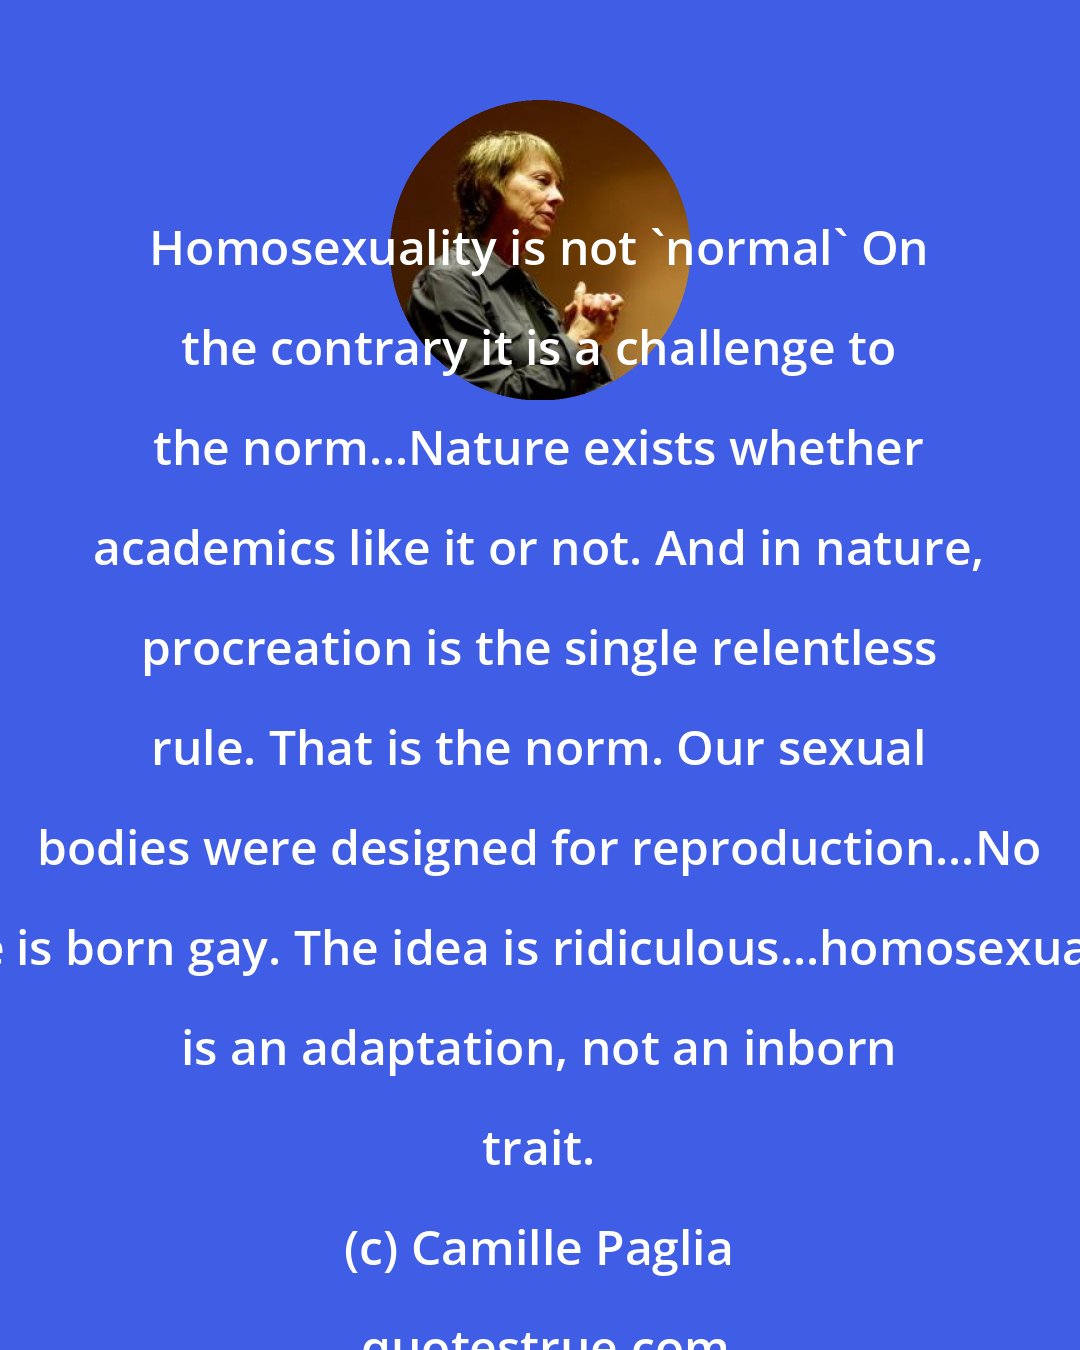 Camille Paglia: Homosexuality is not 'normal' On the contrary it is a challenge to the norm...Nature exists whether academics like it or not. And in nature, procreation is the single relentless rule. That is the norm. Our sexual bodies were designed for reproduction...No one is born gay. The idea is ridiculous...homosexuality is an adaptation, not an inborn trait.